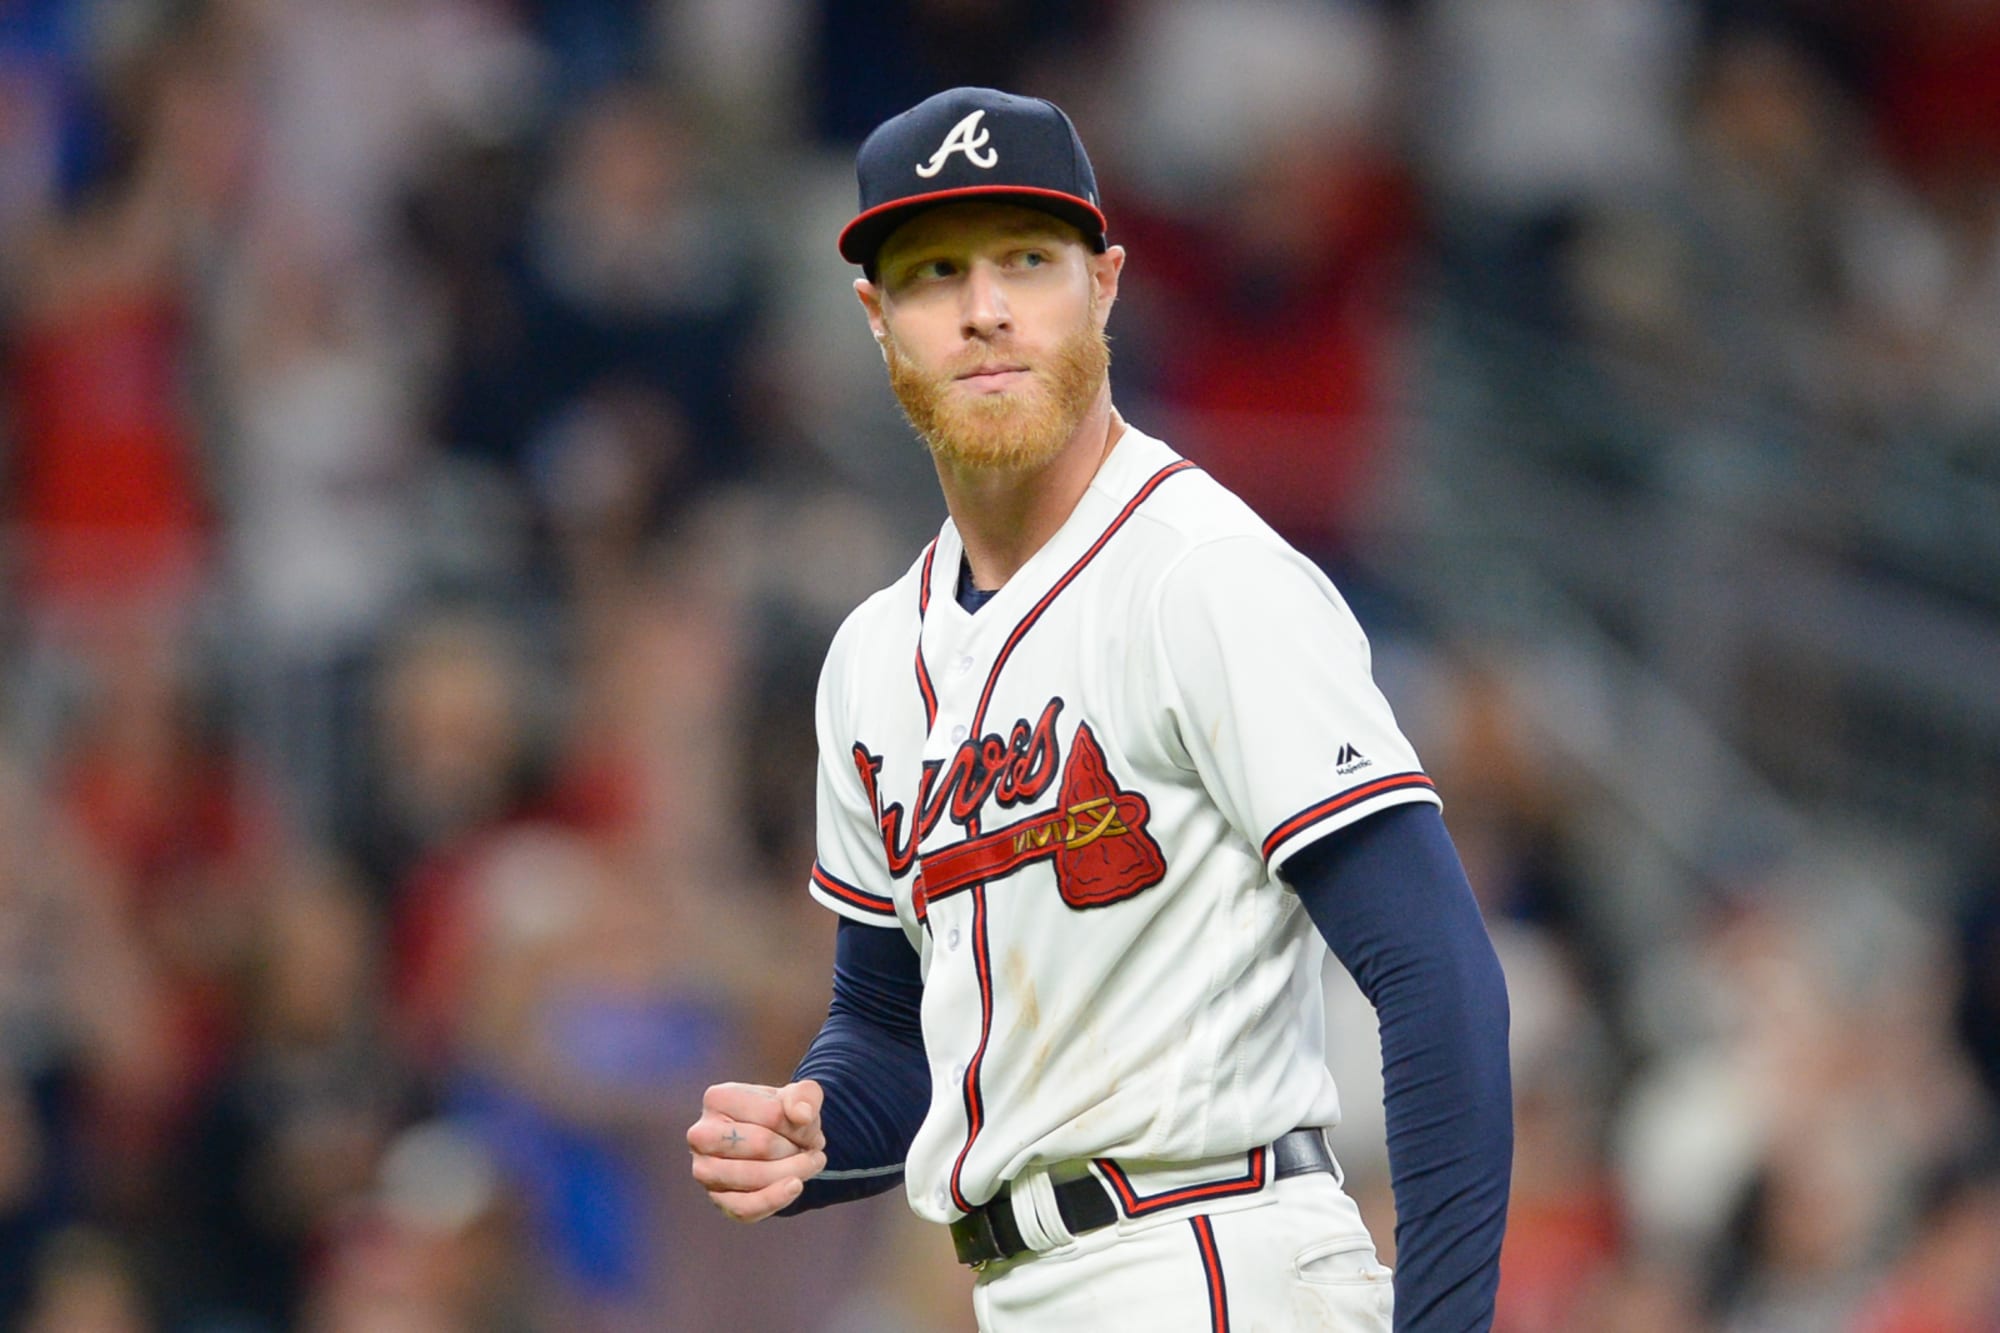 Atlanta Braves Mike Foltynewicz is emerging as an ace